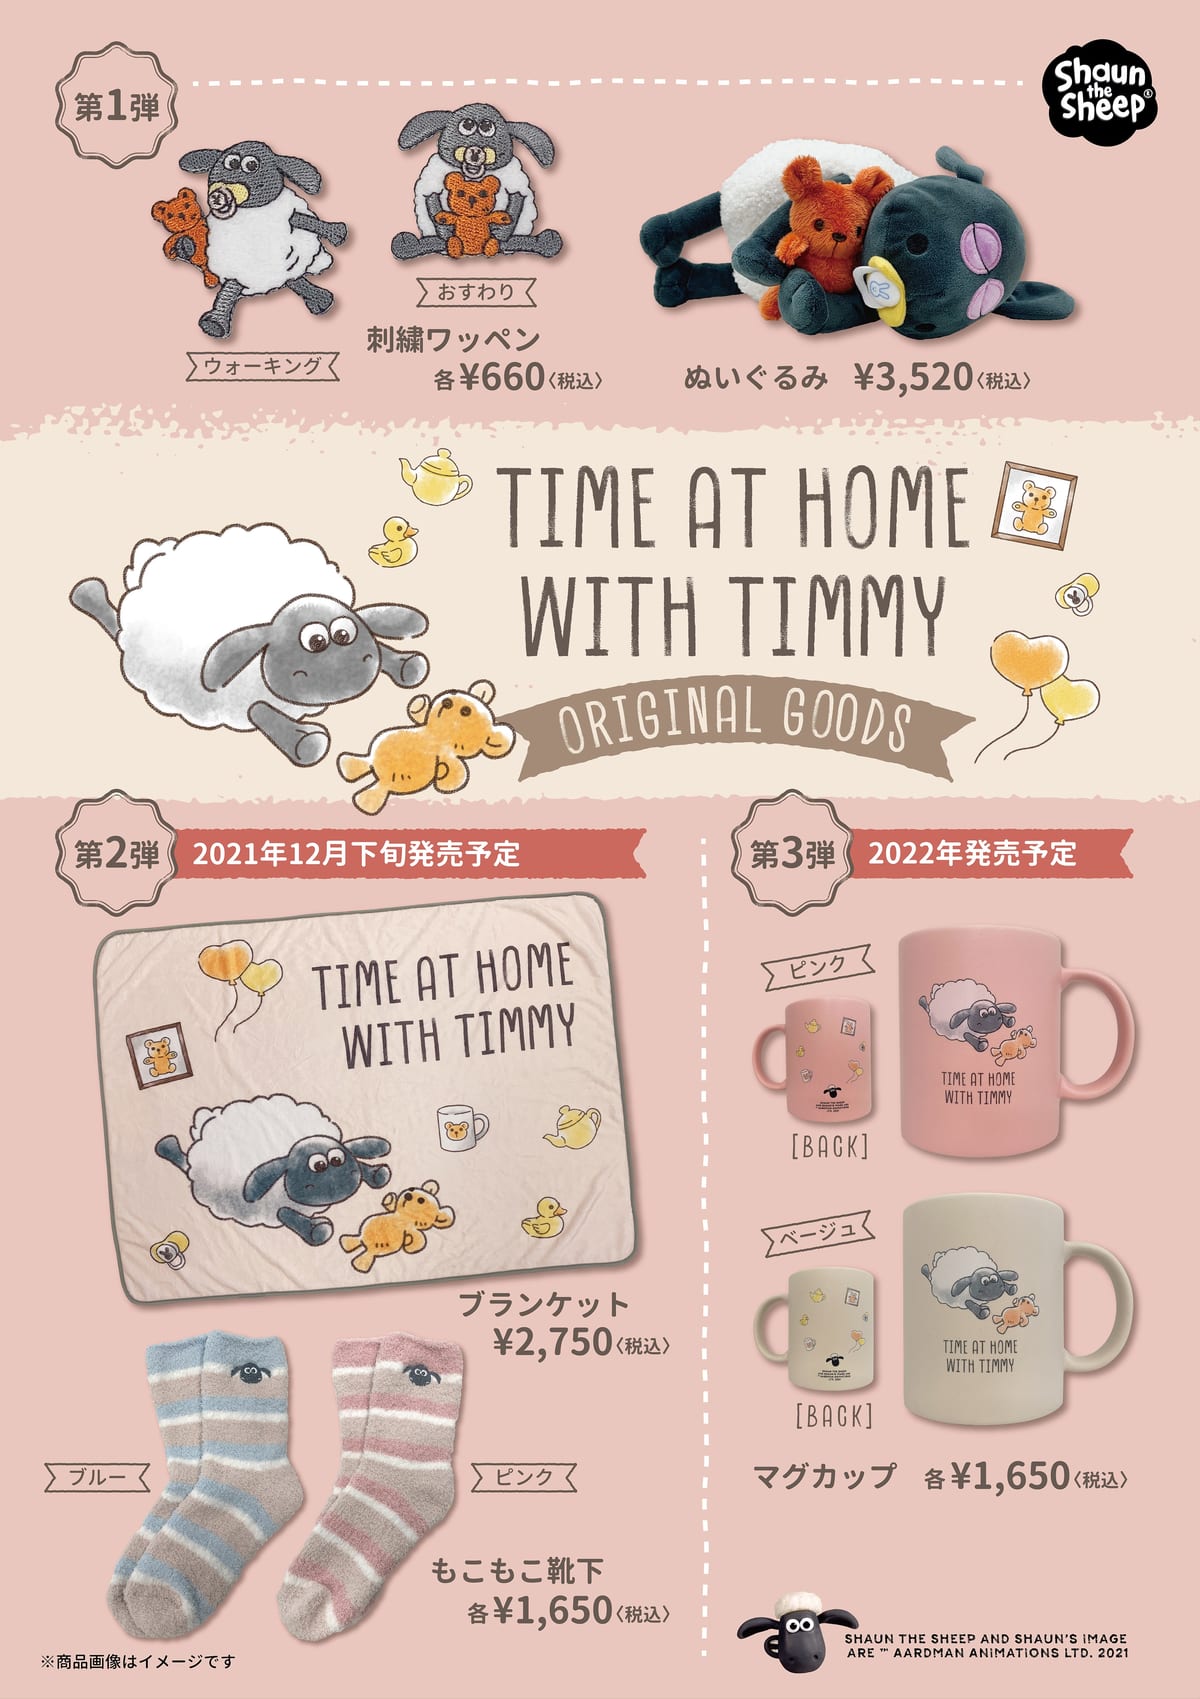 「TIME AT HOME WITH TIMMY」シリーズ